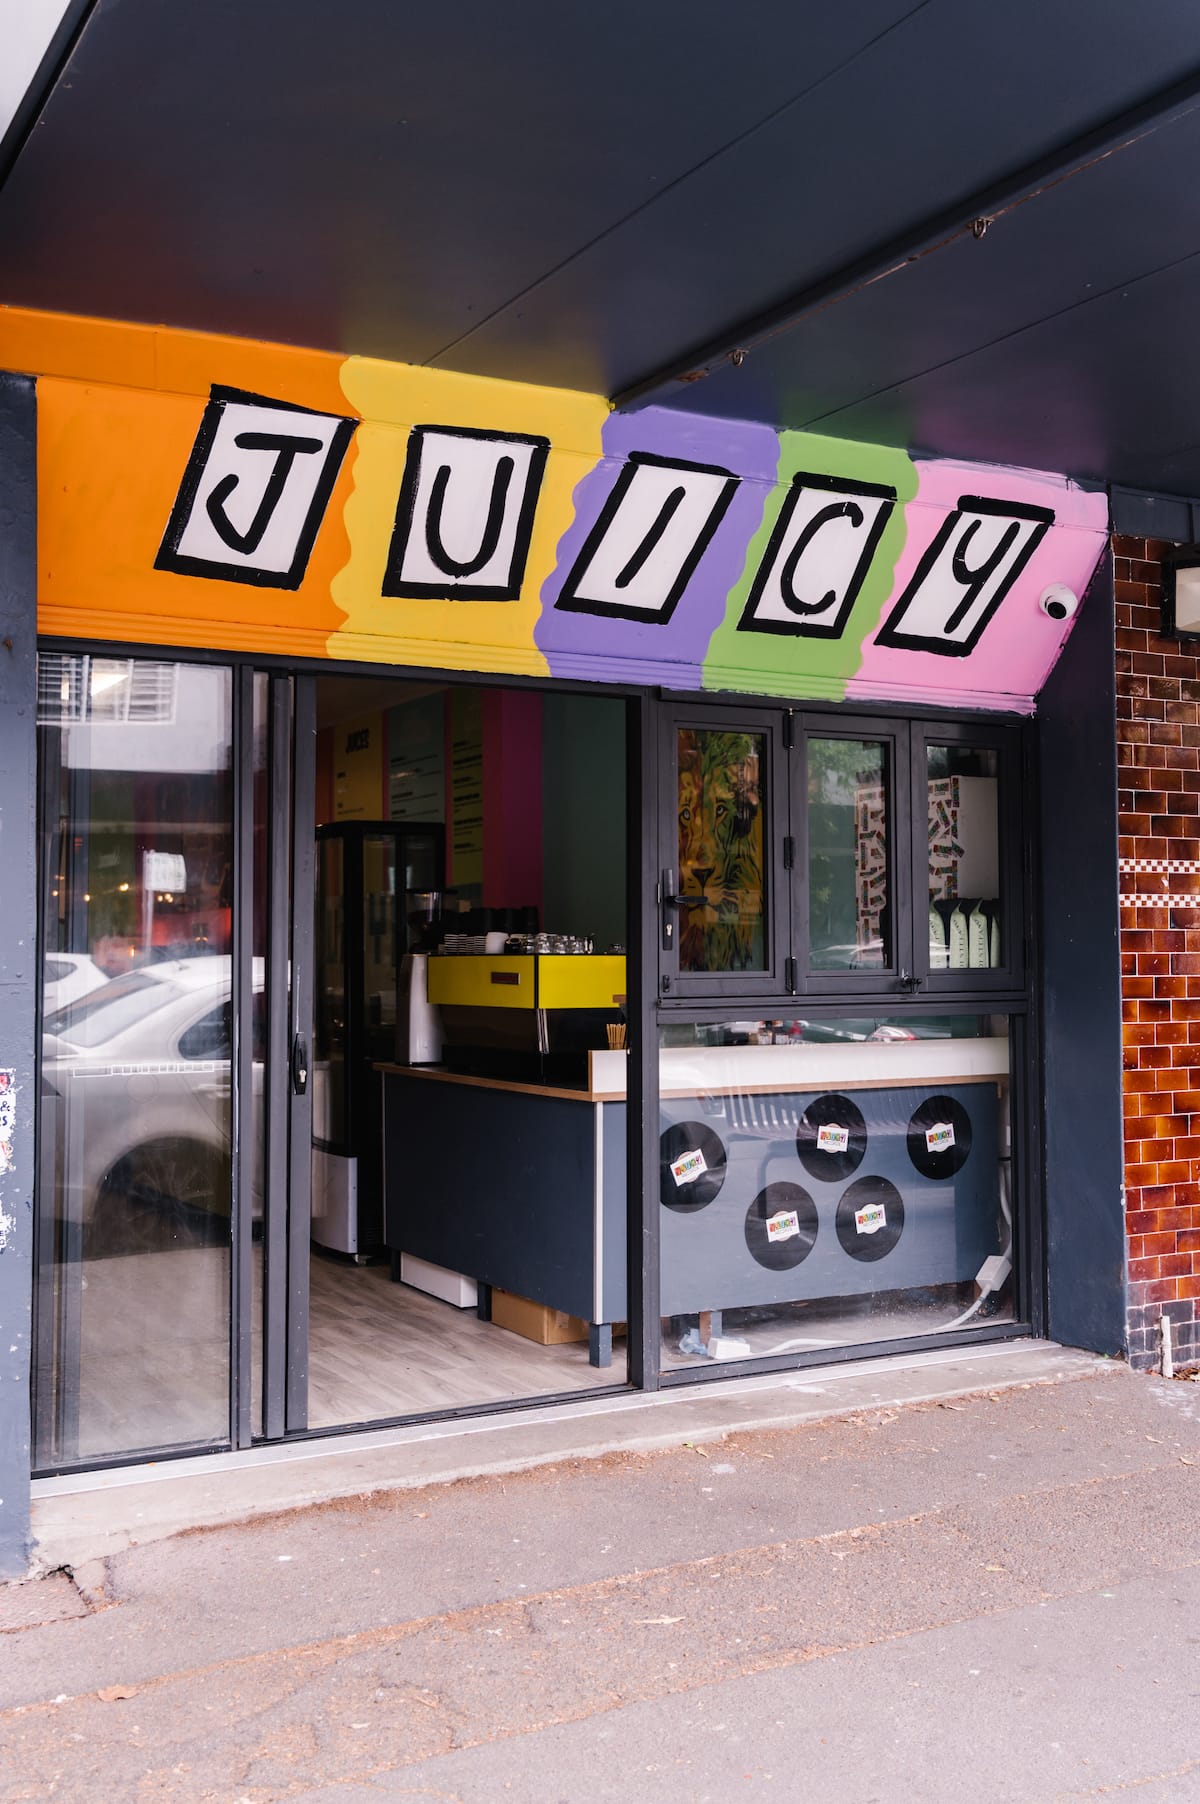 juicy records cafe record shop darby st newcastle